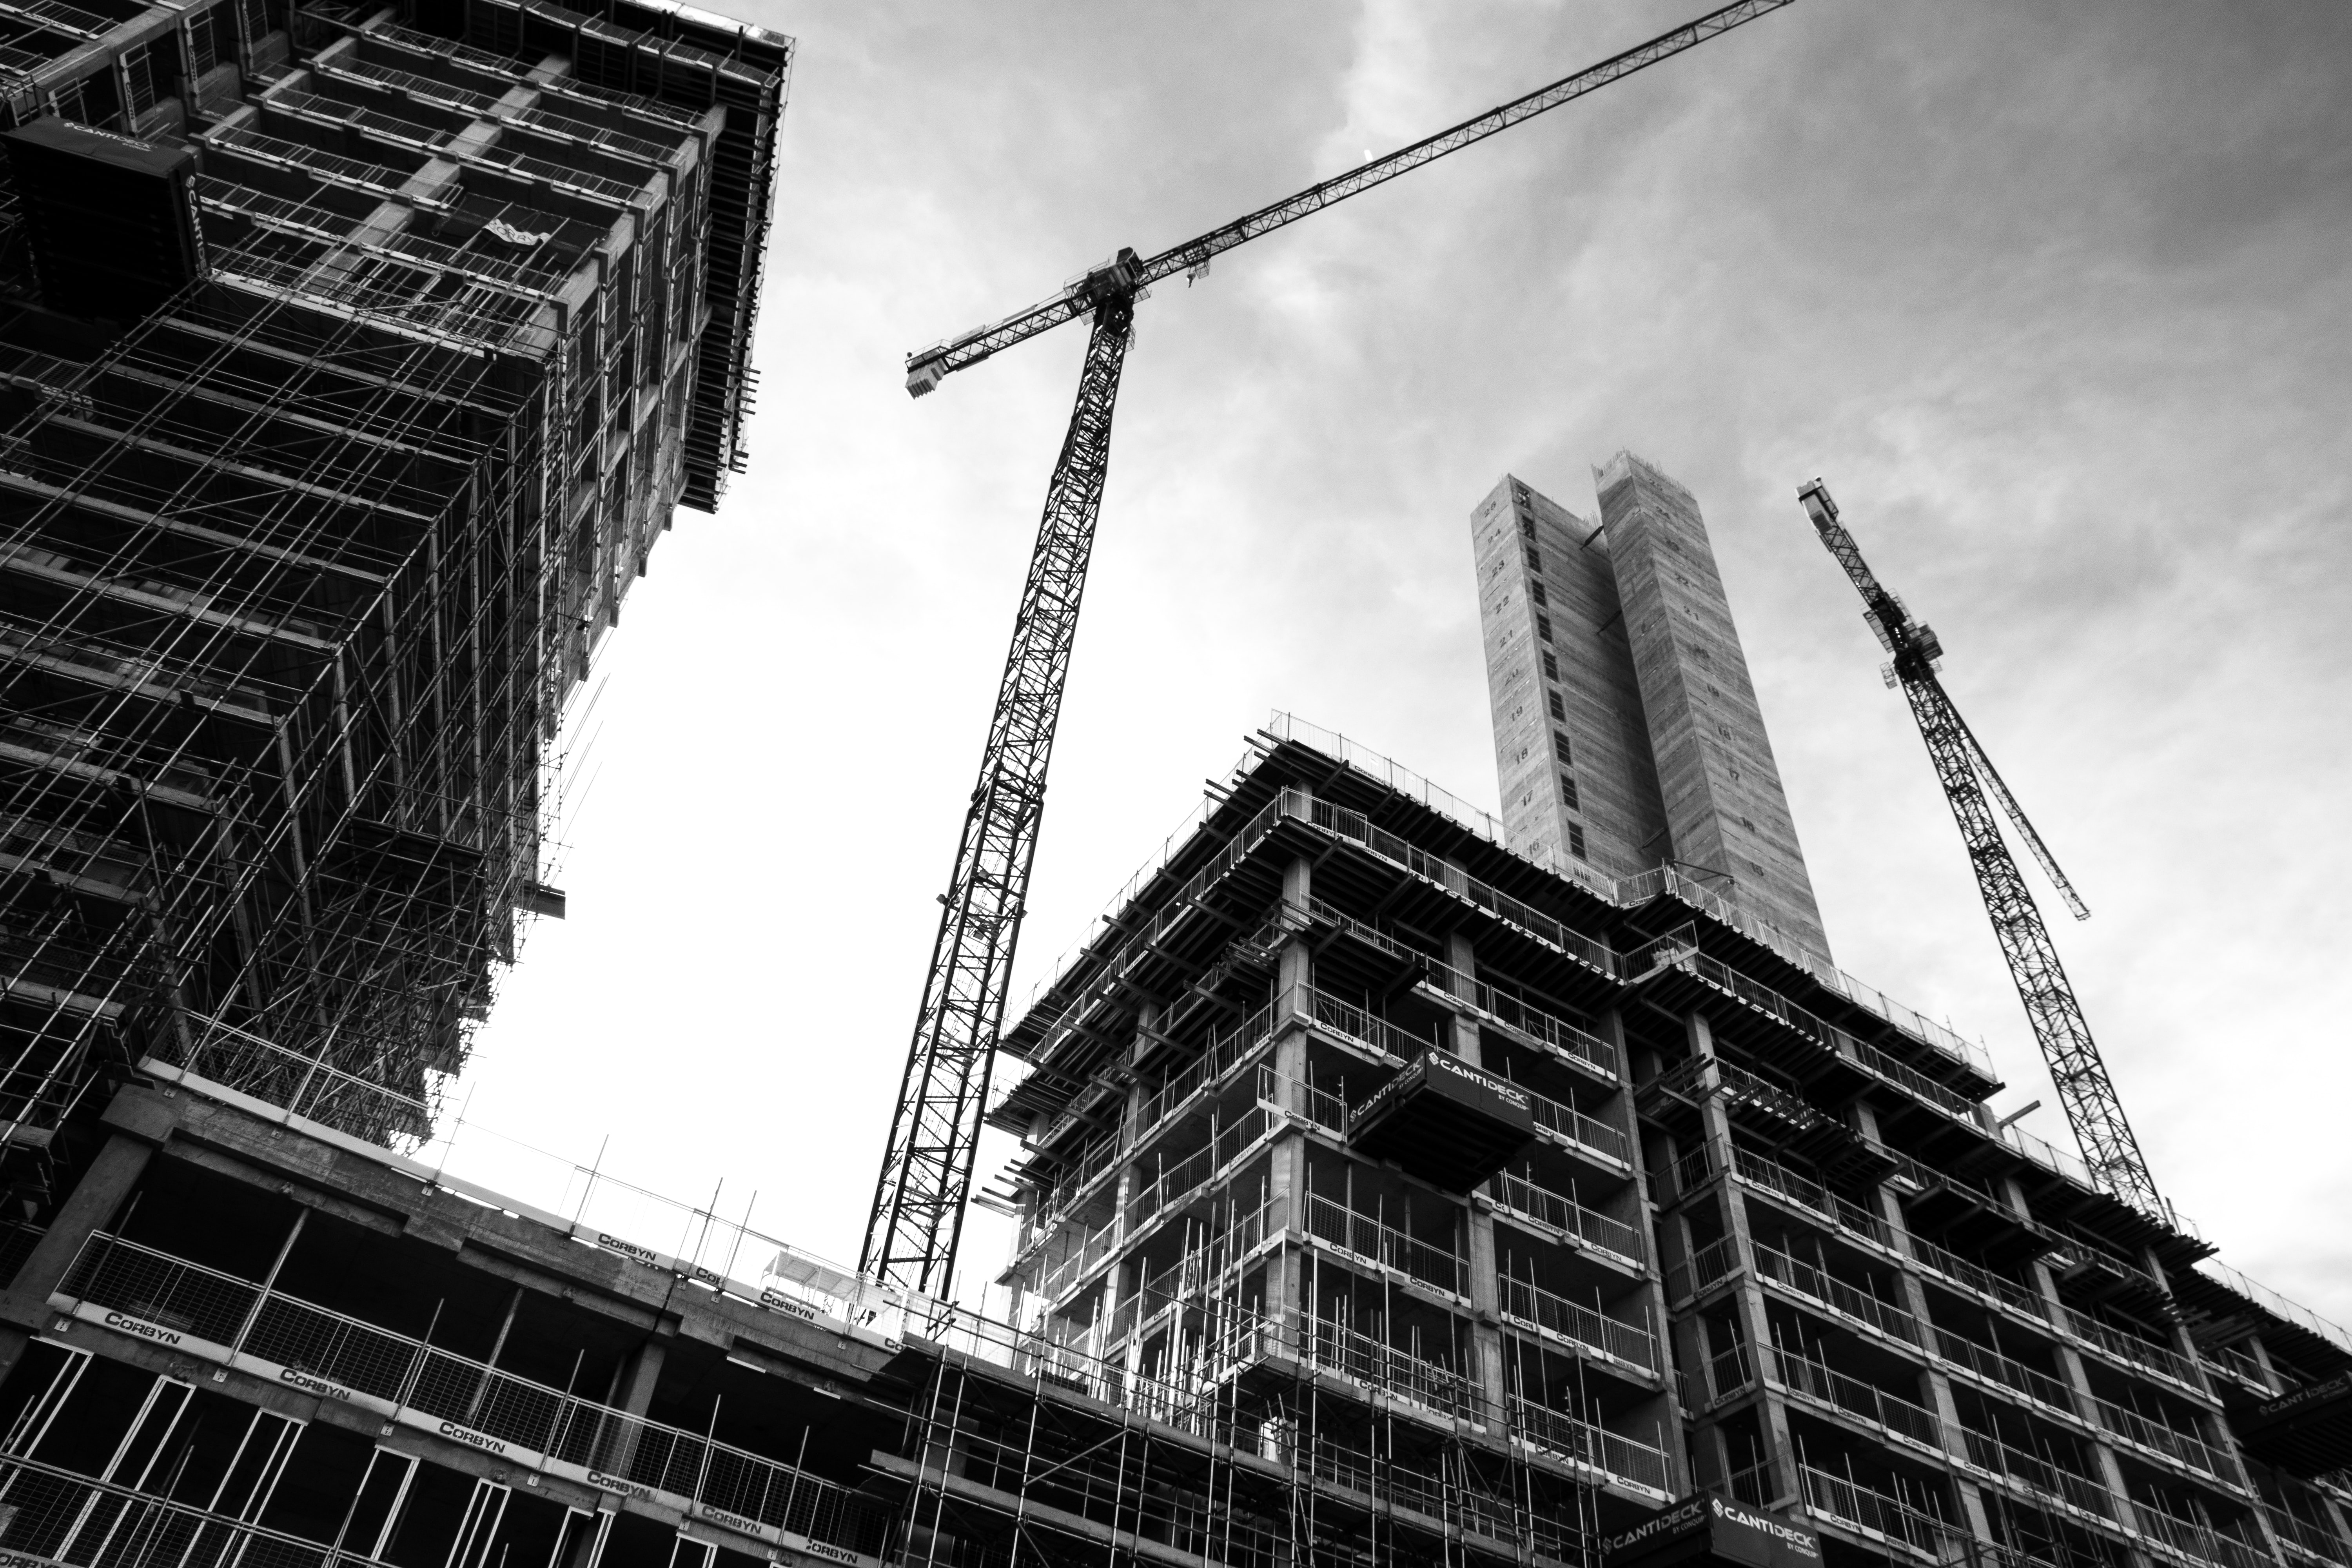 Residential Planning Applications Down to Lowest Level Since 2012